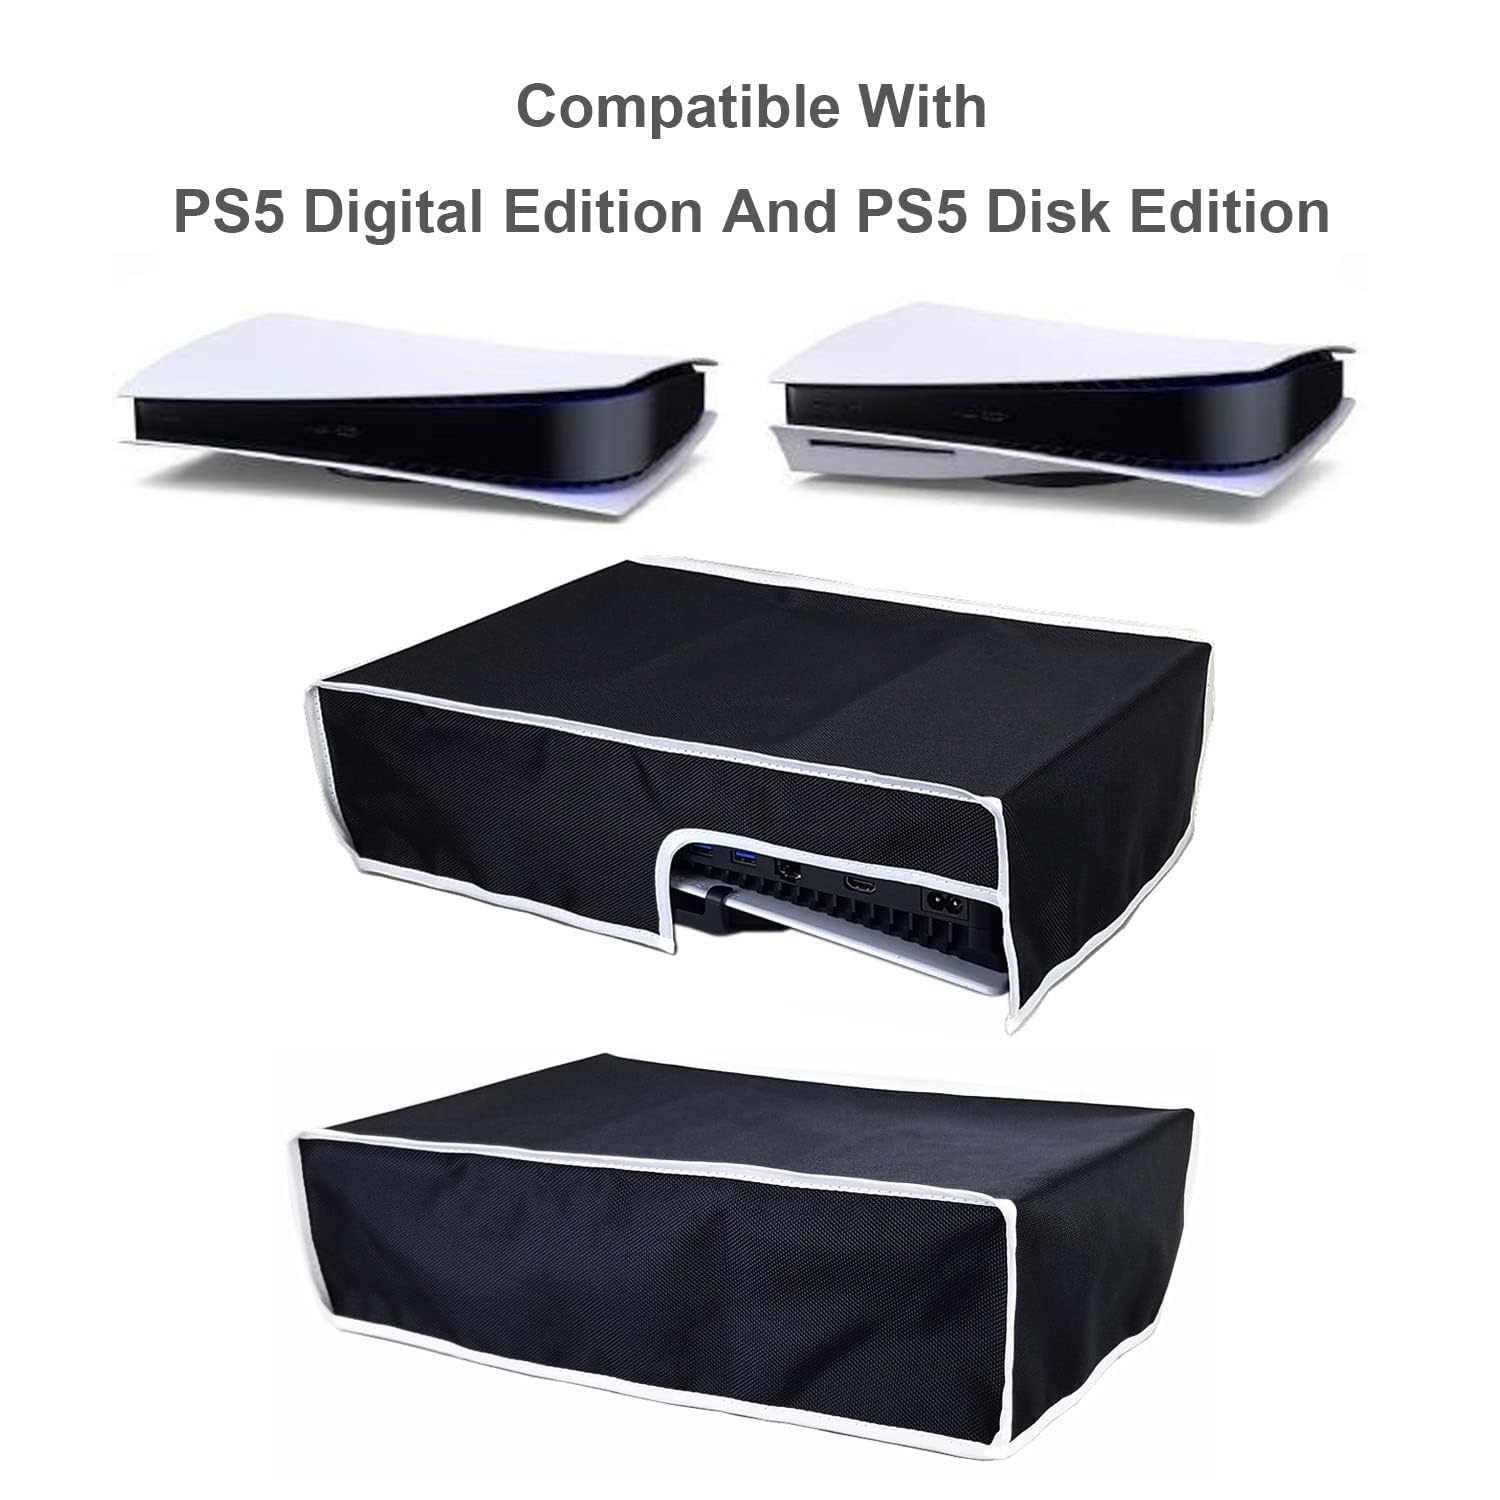 New World Horizontal Dust Cover for PS5 Console Dust Guard with Back Cable Port for Sony Playstation 5 Console Digital & Disk Version